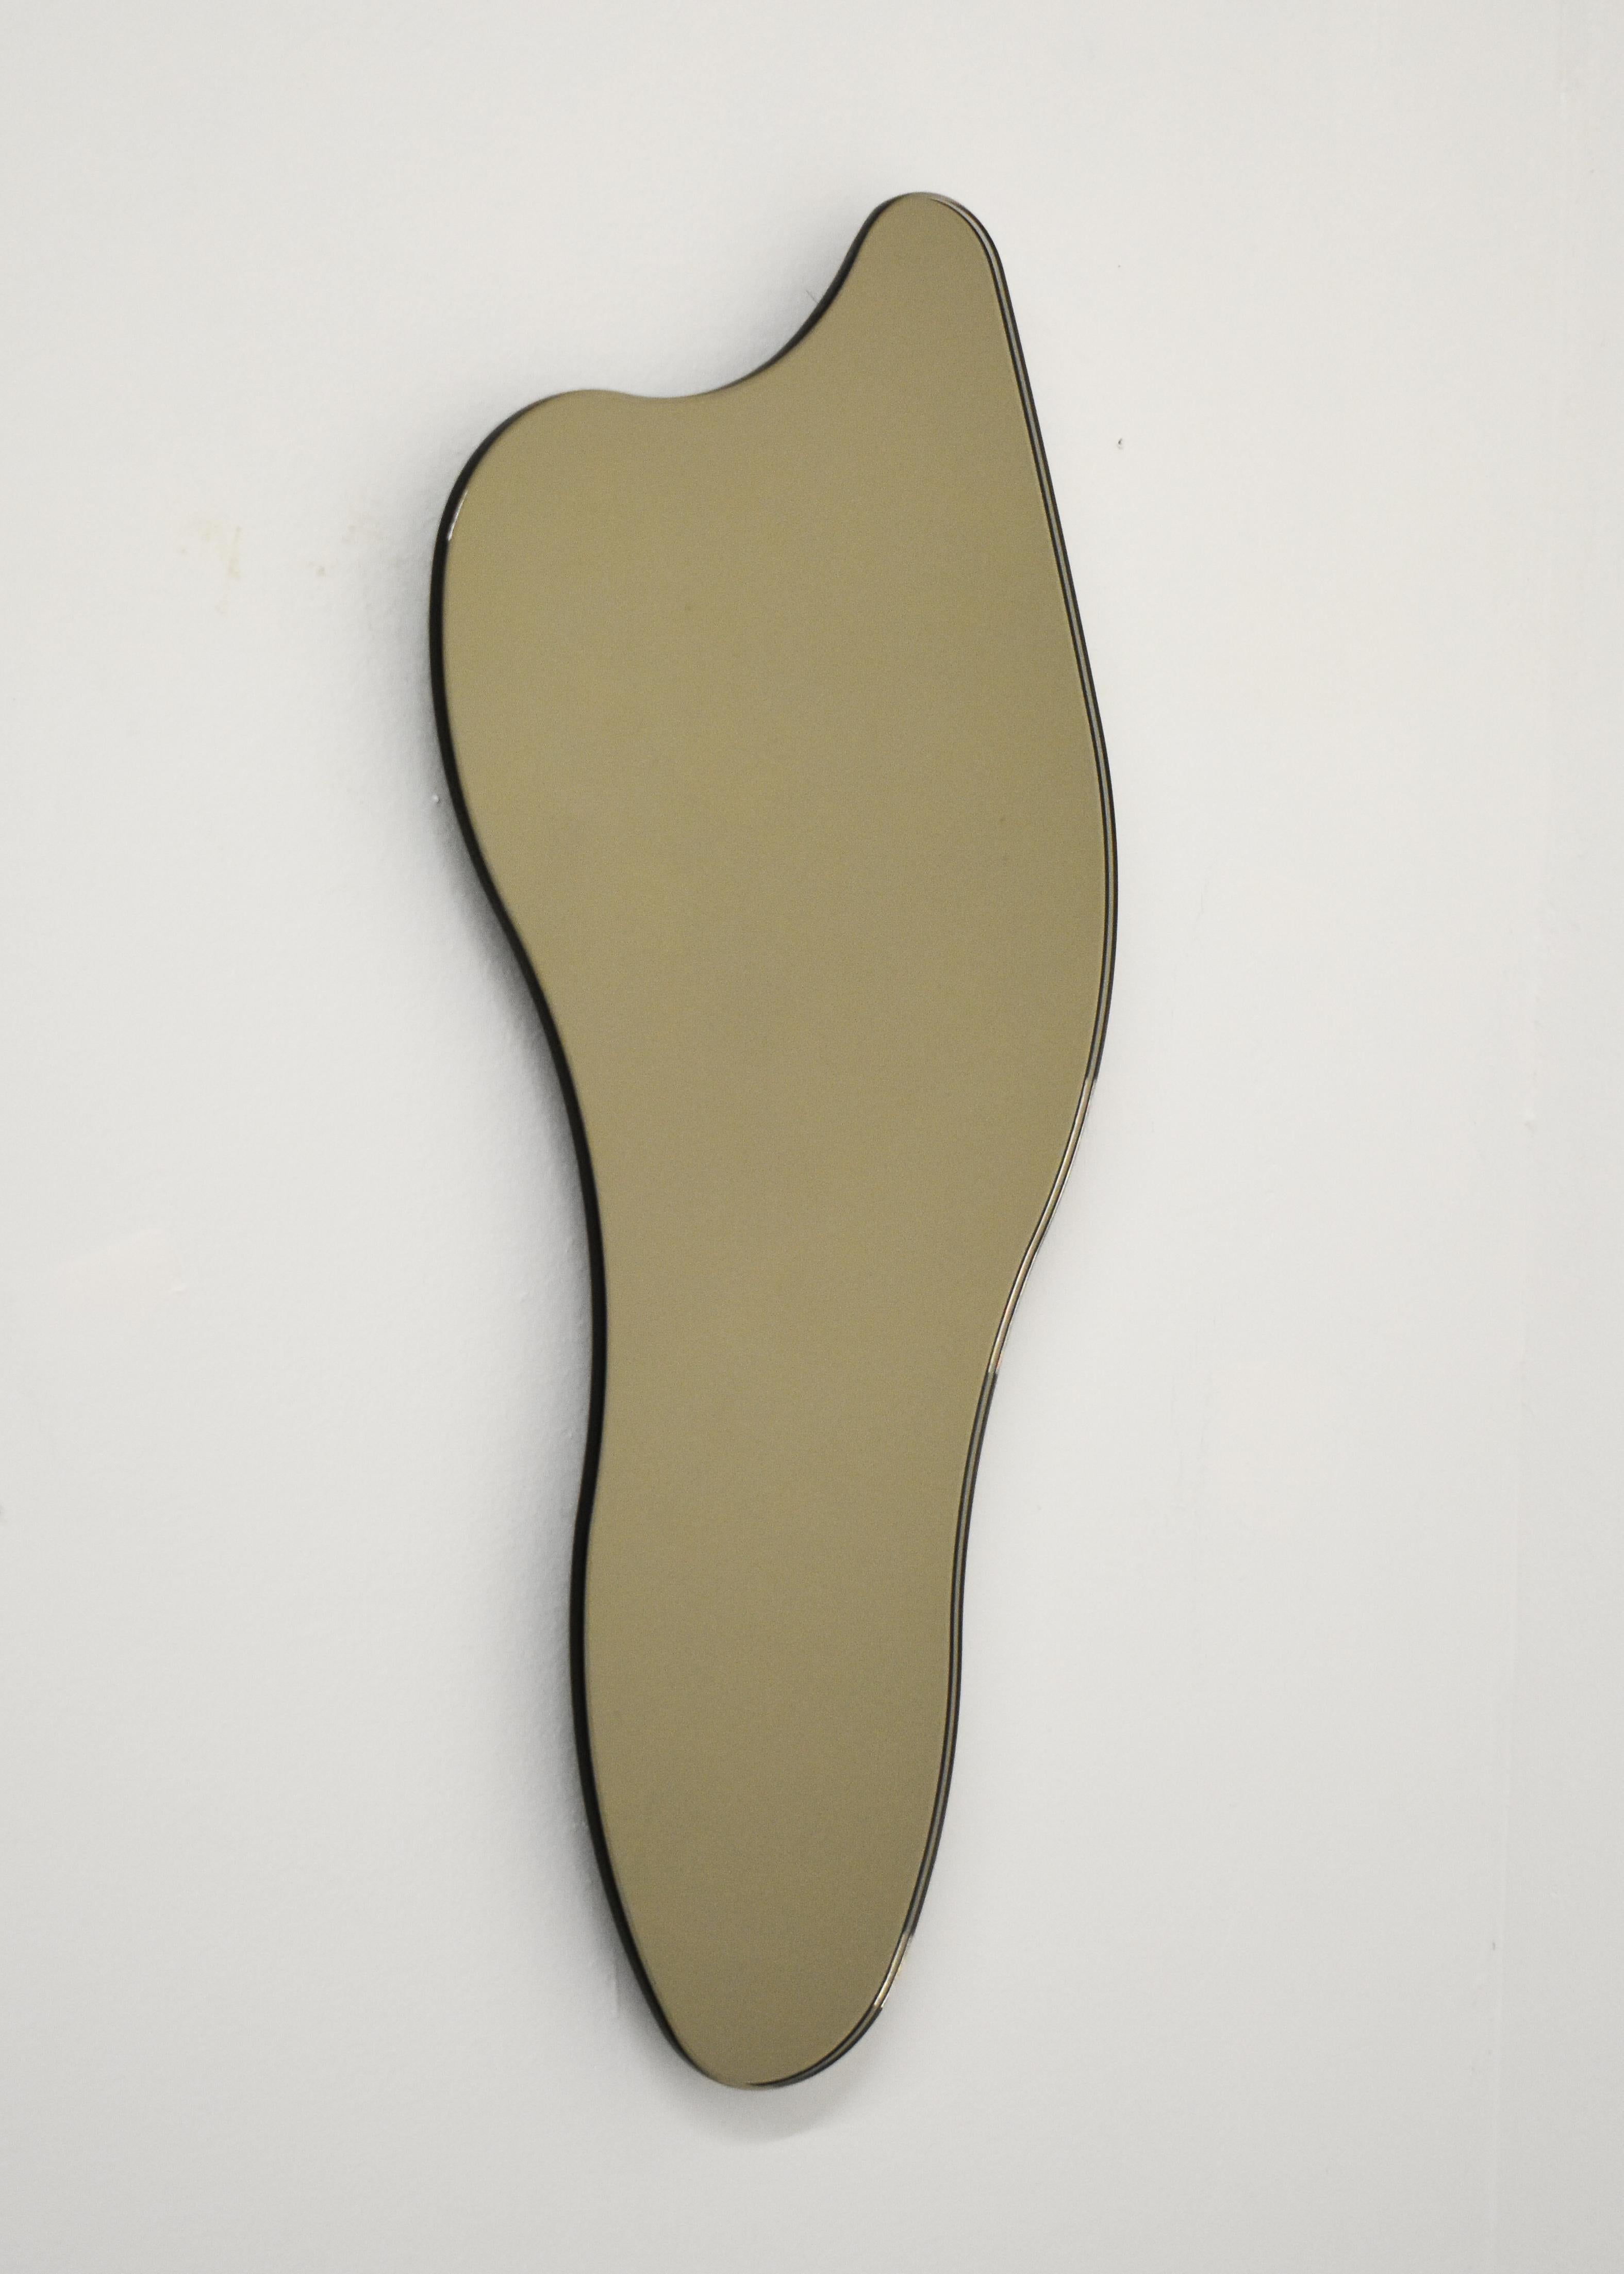 ISLA MIRROR - No. 5
Materials: Bronze Glass, Black MDF 
Dimensions: 8.25”W X 1”D X 17”H

Minimalist, elegant, amorphically shaped floating bronze glass mirrors inspired by the topography of the Philippine archipelago. The ISLA Mirrors are